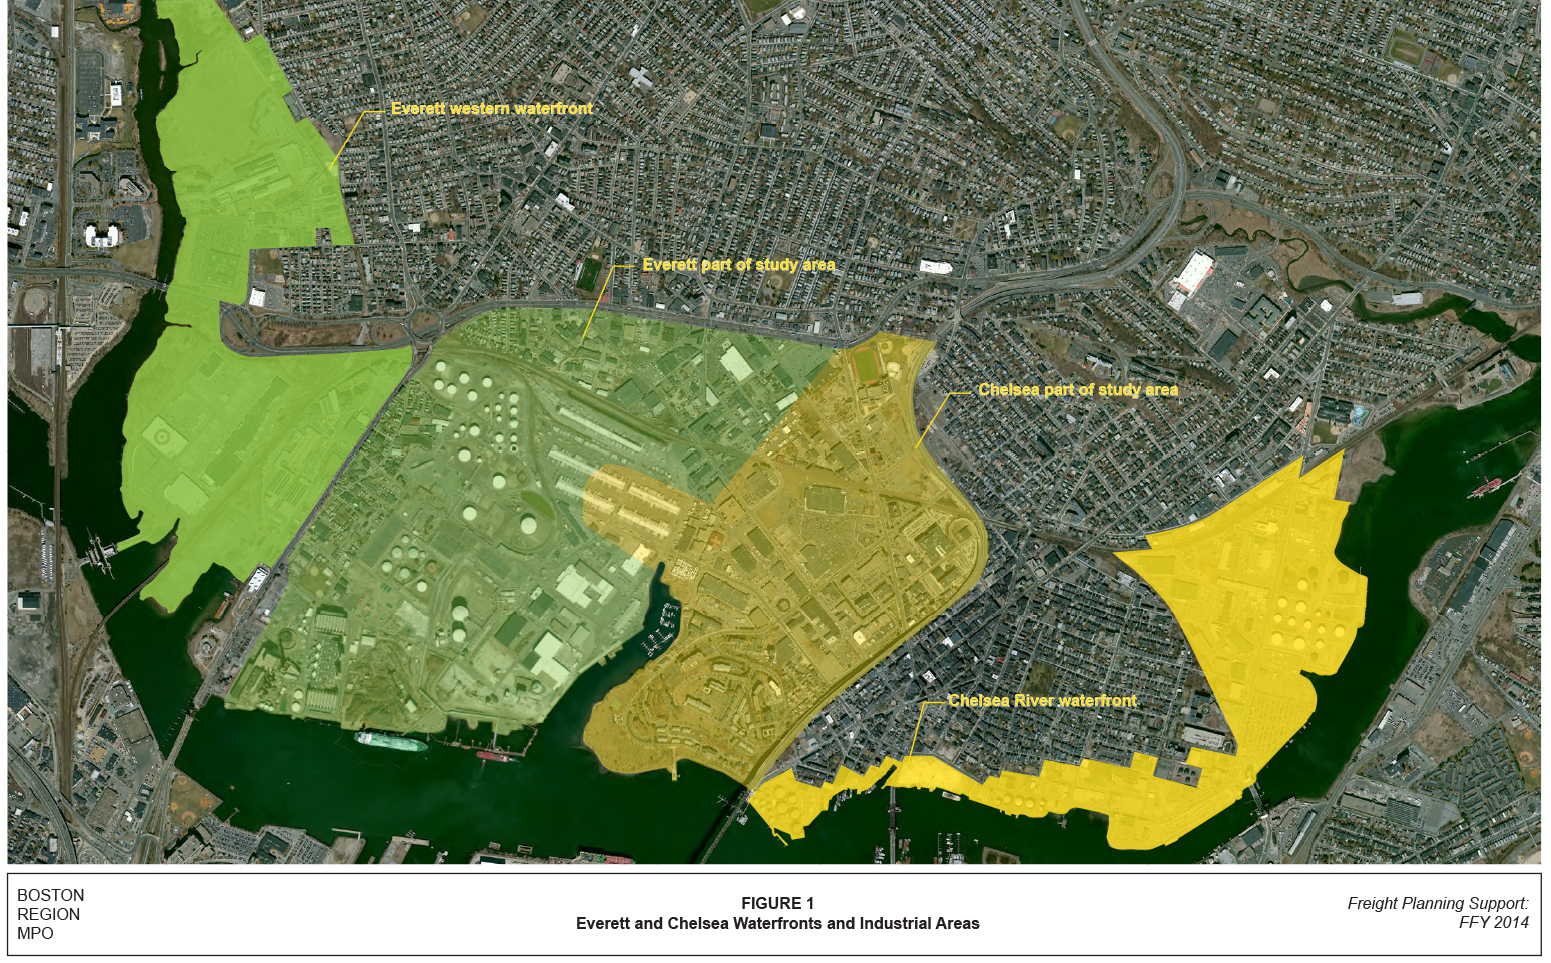 FIGURE 1. Everett and Chelsea Waterfronts and Industrial Areas
This map shows the Everett and Chelsea waterfronts and nearby industrial areas, Everett in green and Chelsea in yellow. Parts of the these areas are shaded more lightly, and these parts make up the Study Area.
